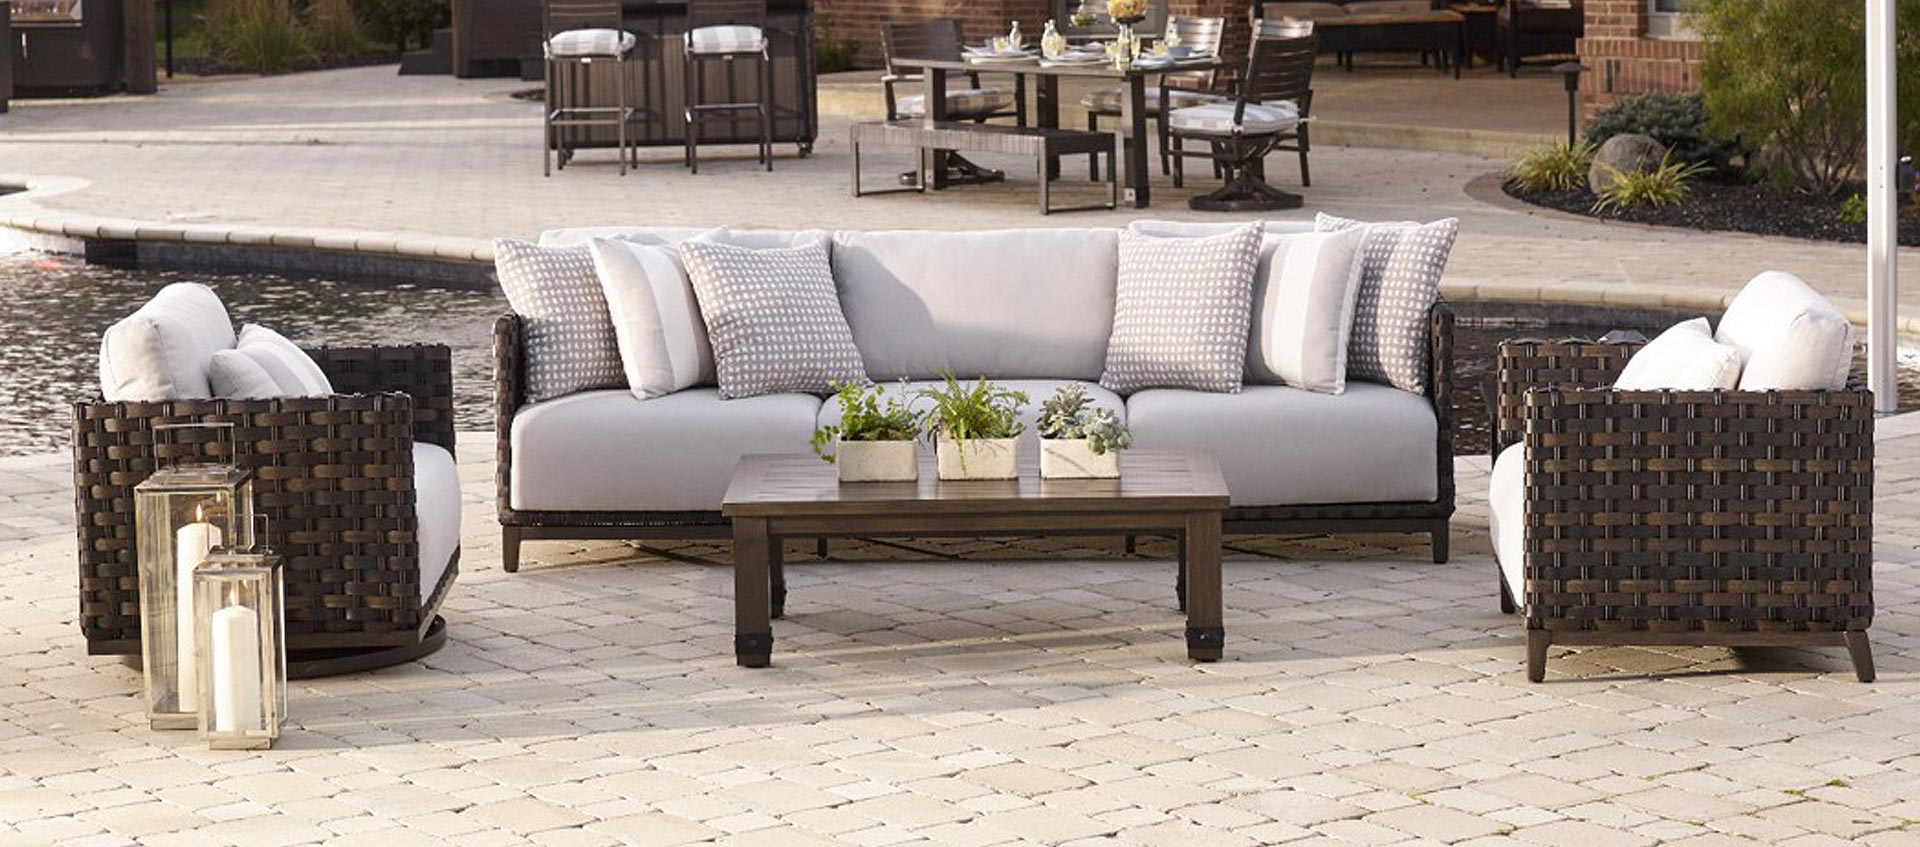 All American Outdoor Living Patio Furniture in sizing 1920 X 847